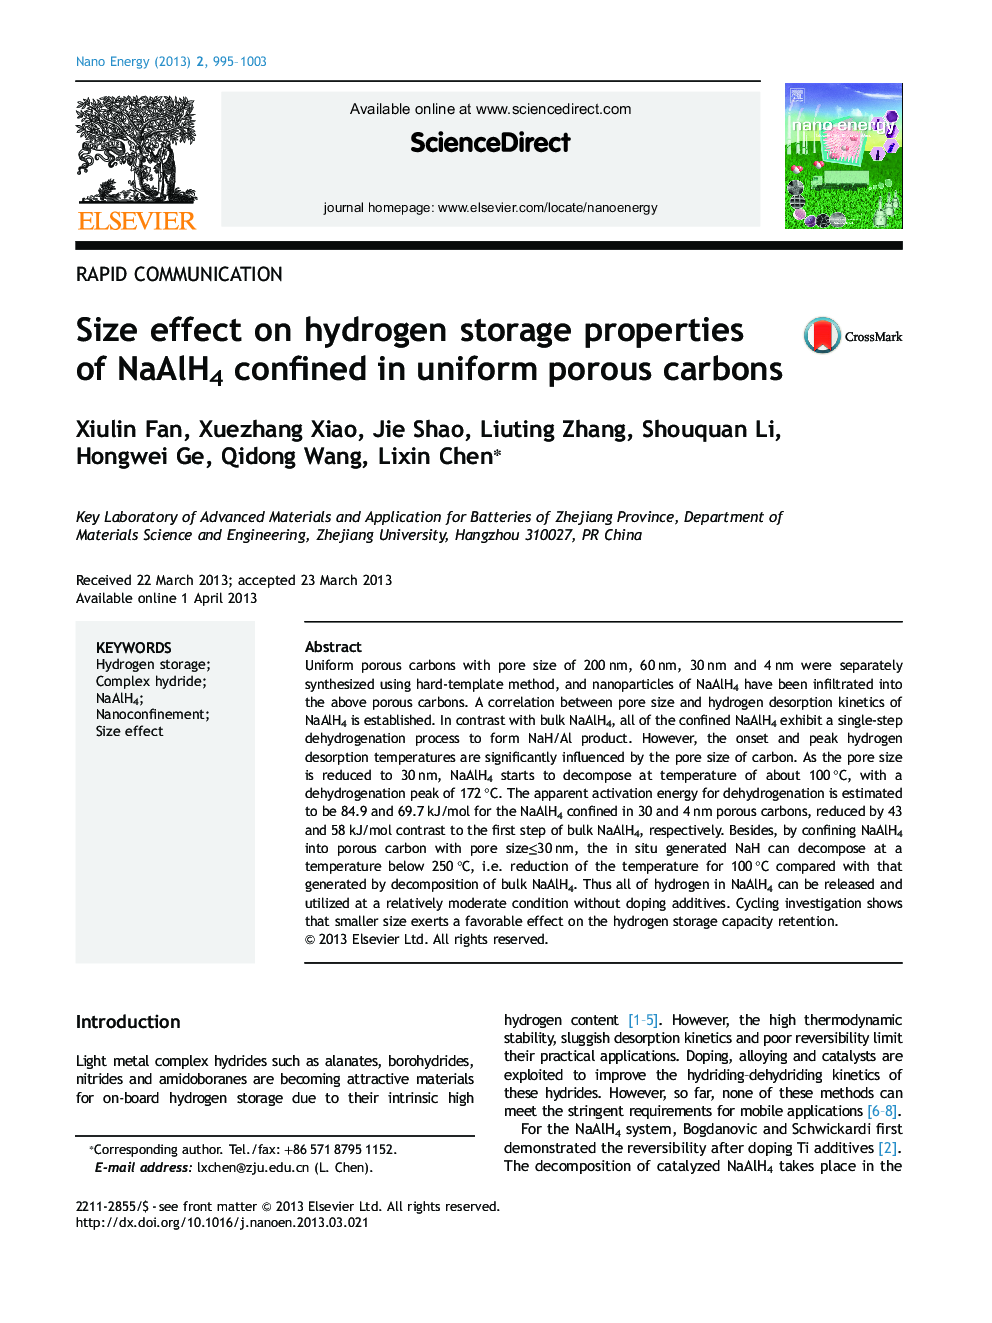 Size effect on hydrogen storage properties of NaAlH4 confined in uniform porous carbons